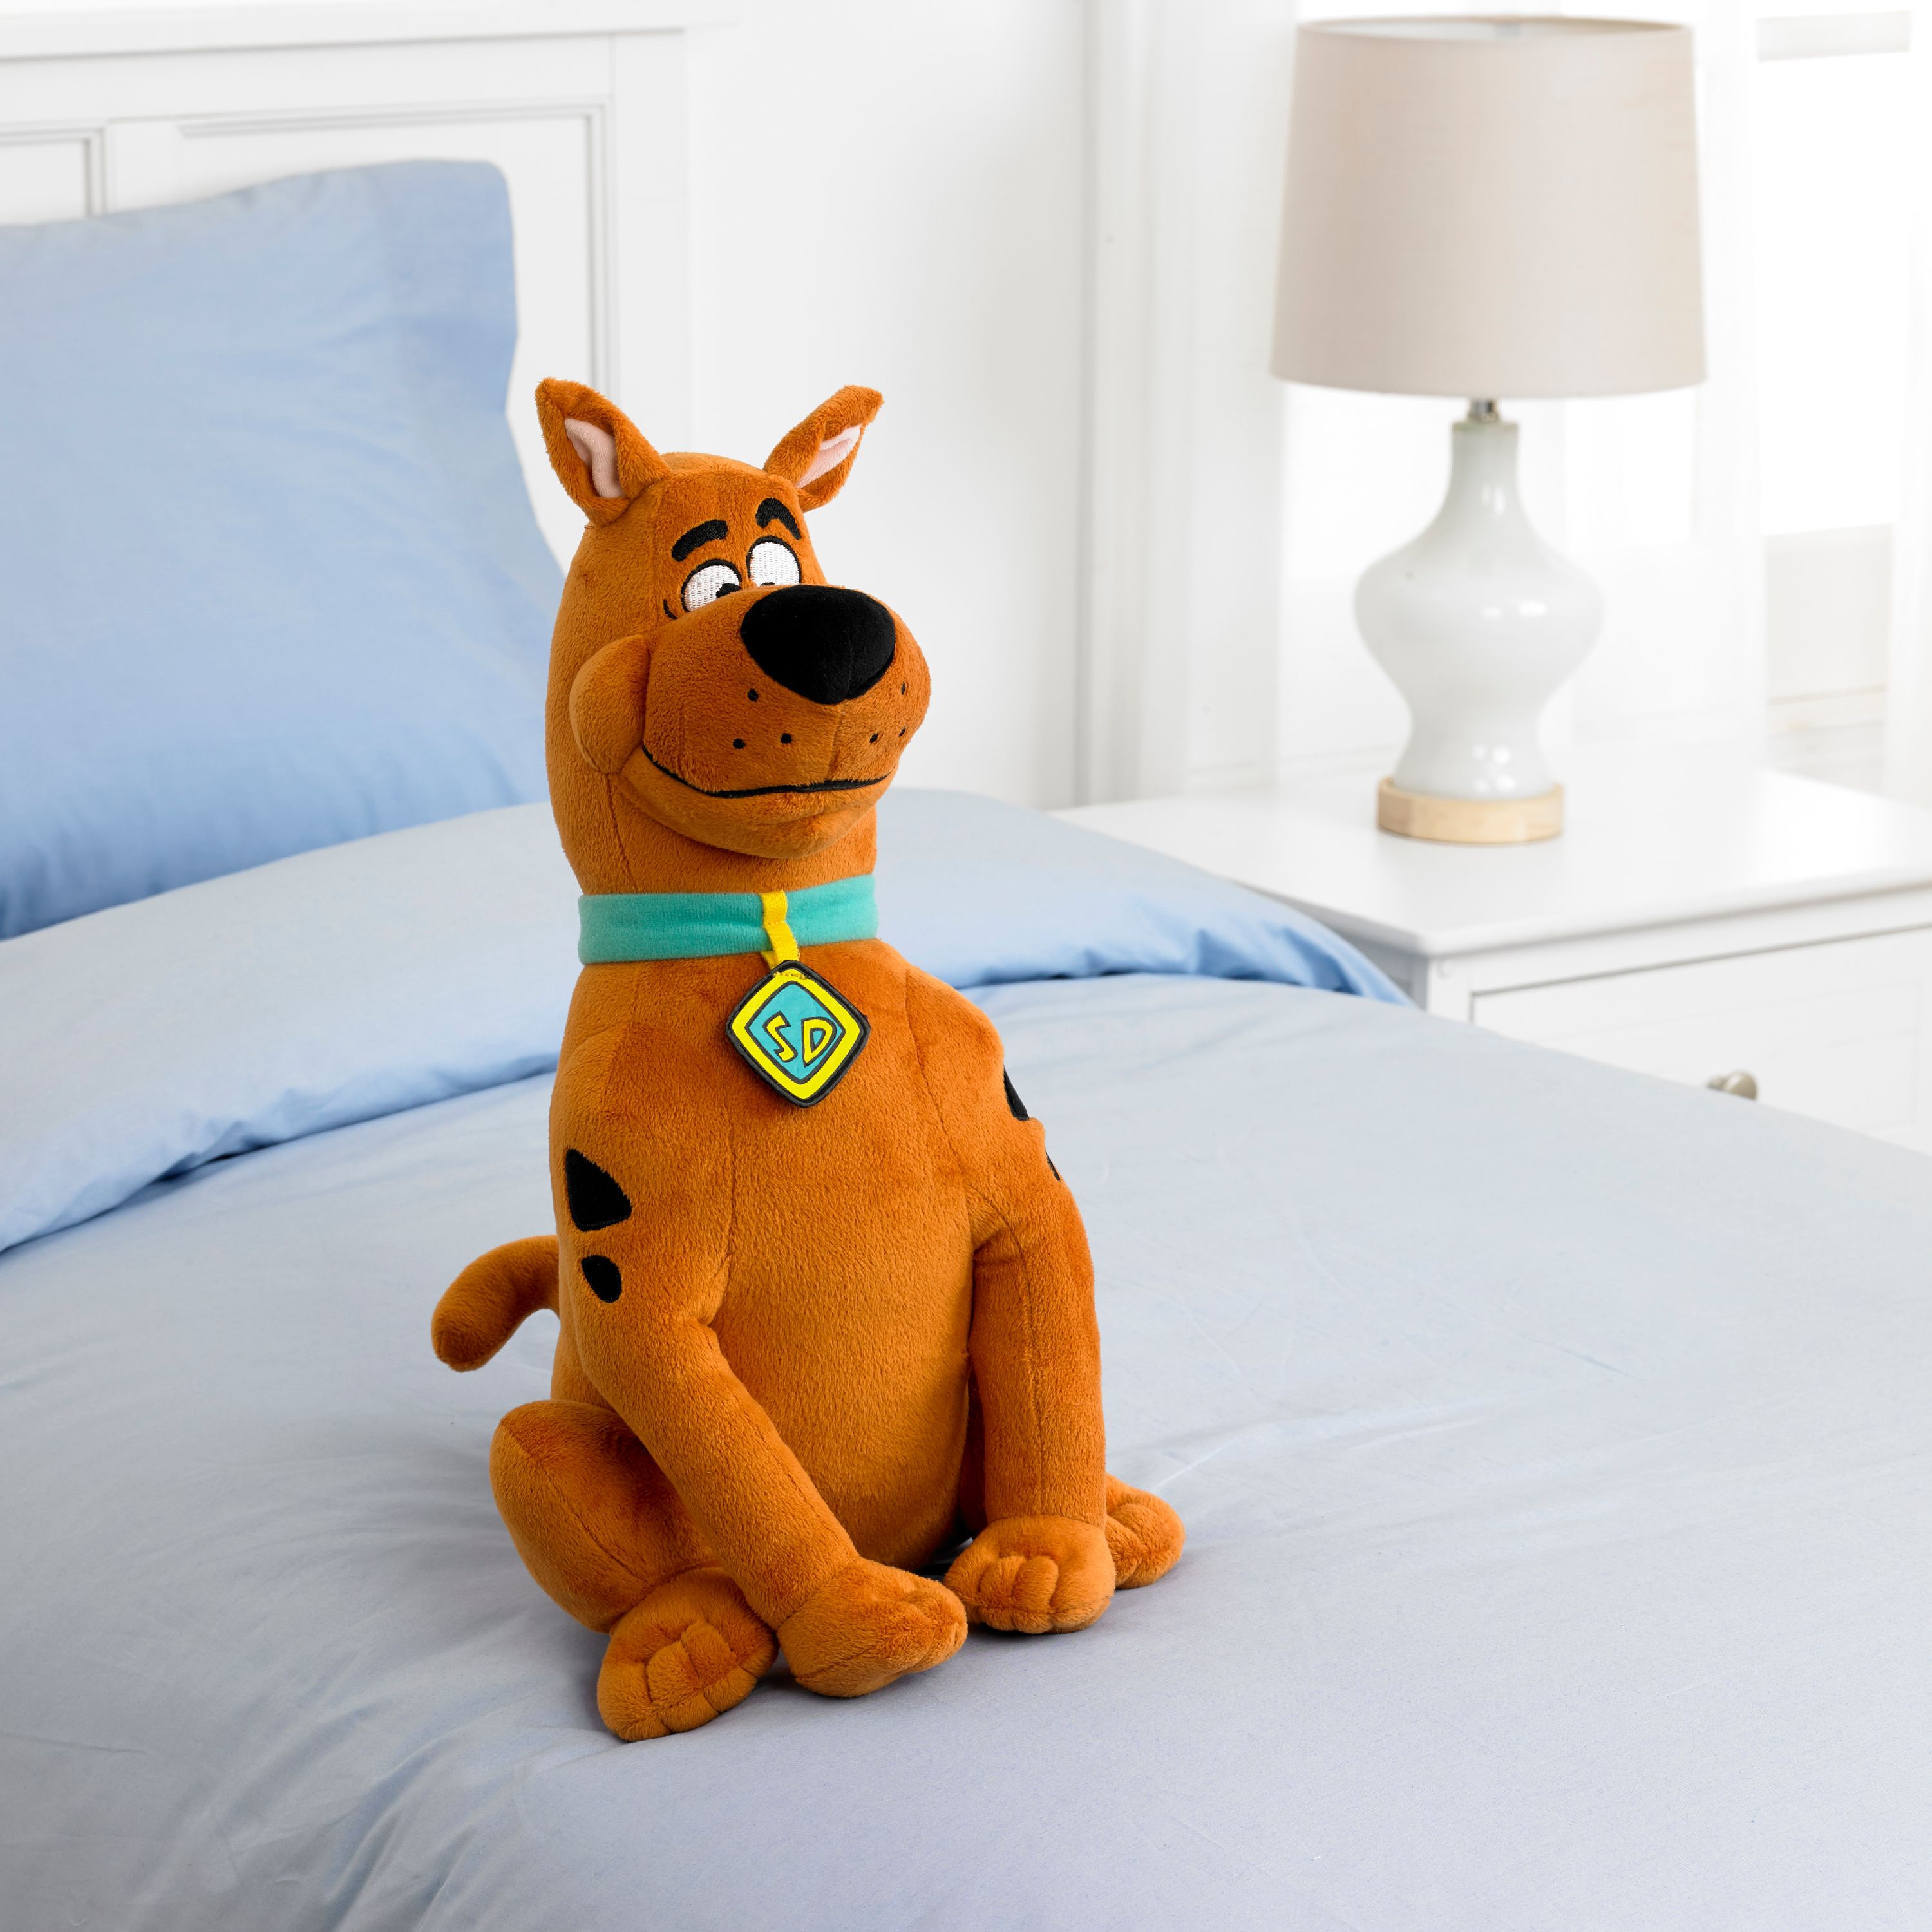 SCOOB! Scooby-Doo Kids Bedding Super Soft Plush Snuggle Cuddle Pillow, Scooby - image 2 of 6